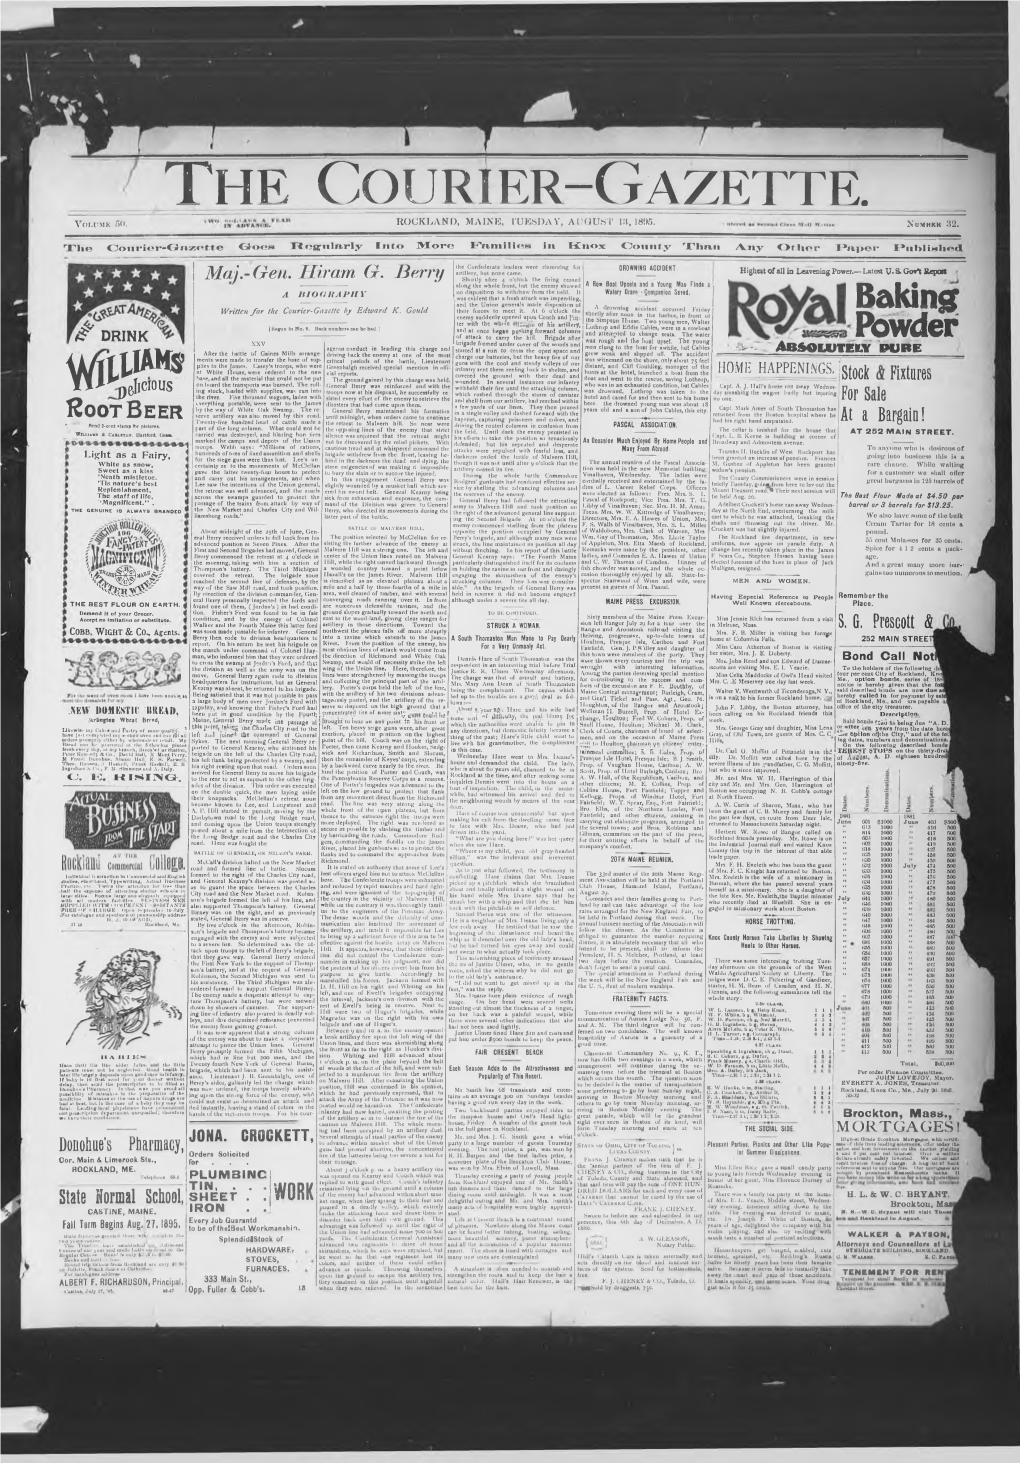 Courier Gazette Tuesday, August 13 1895